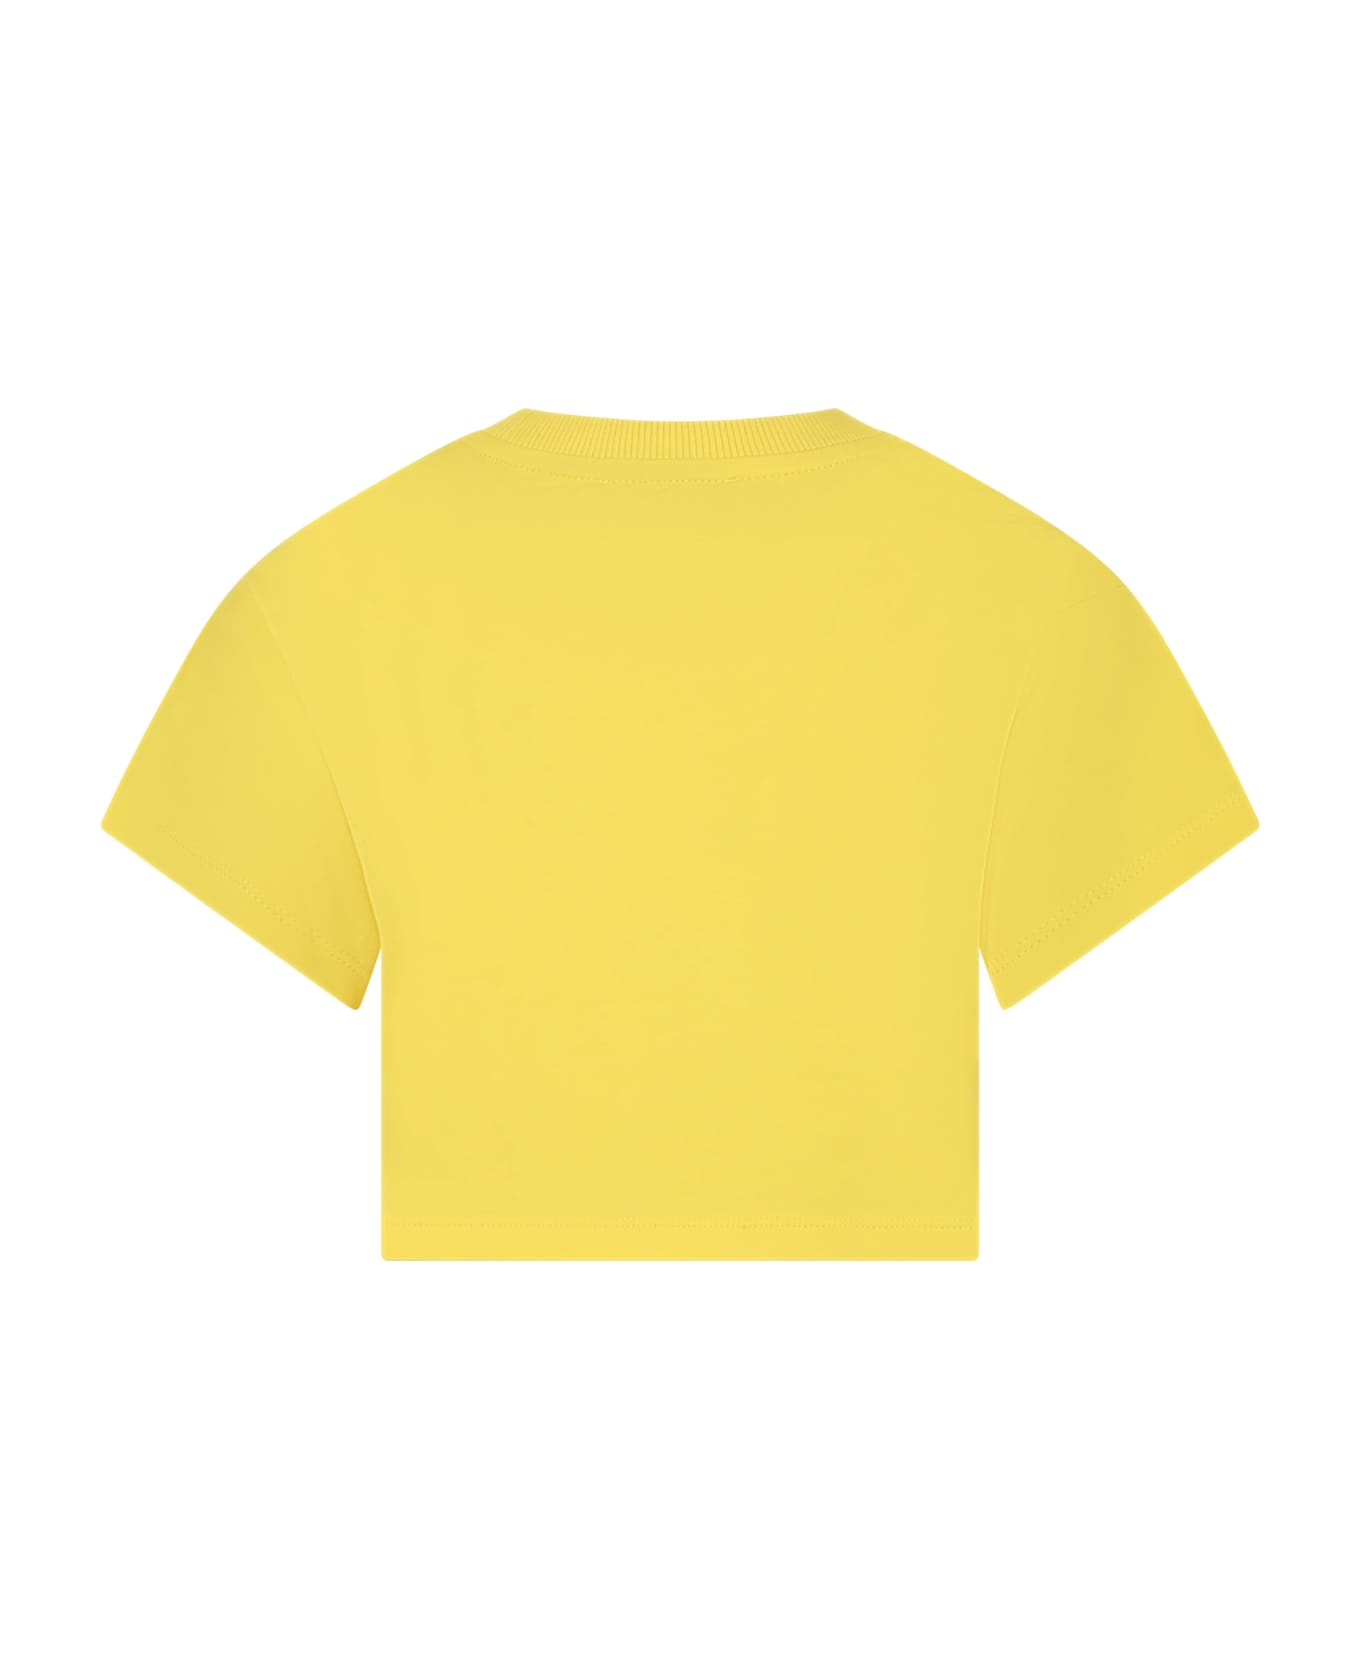 Moschino Yellow T-shirt For Girl With Multicolor Print And Logo - Yellow